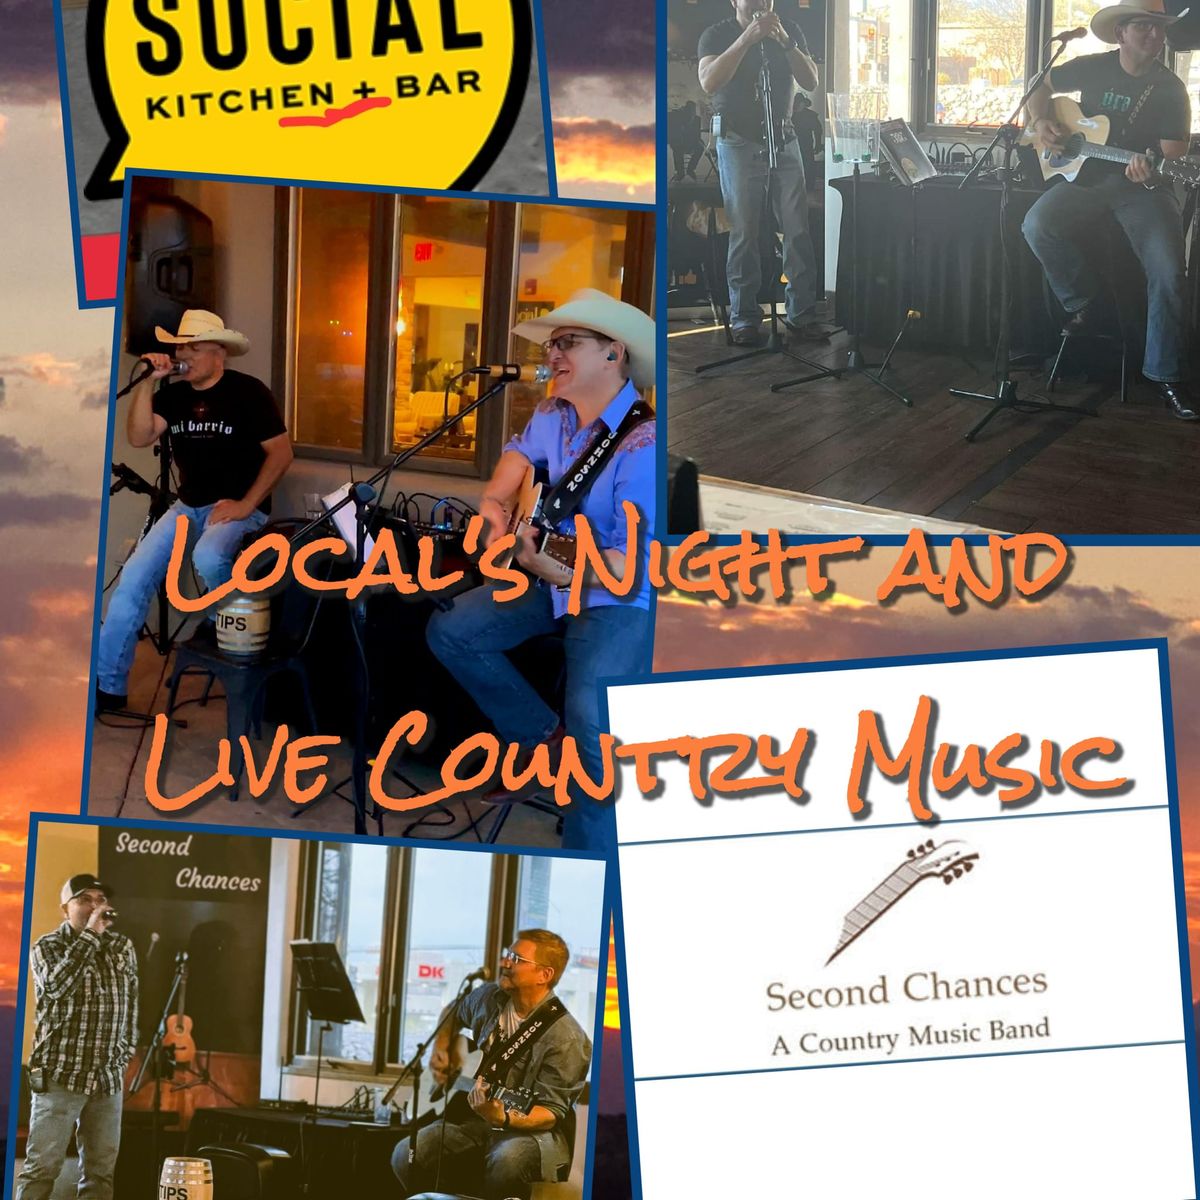 Locals Night and Live County Music at The Social Kitchen & Bar 